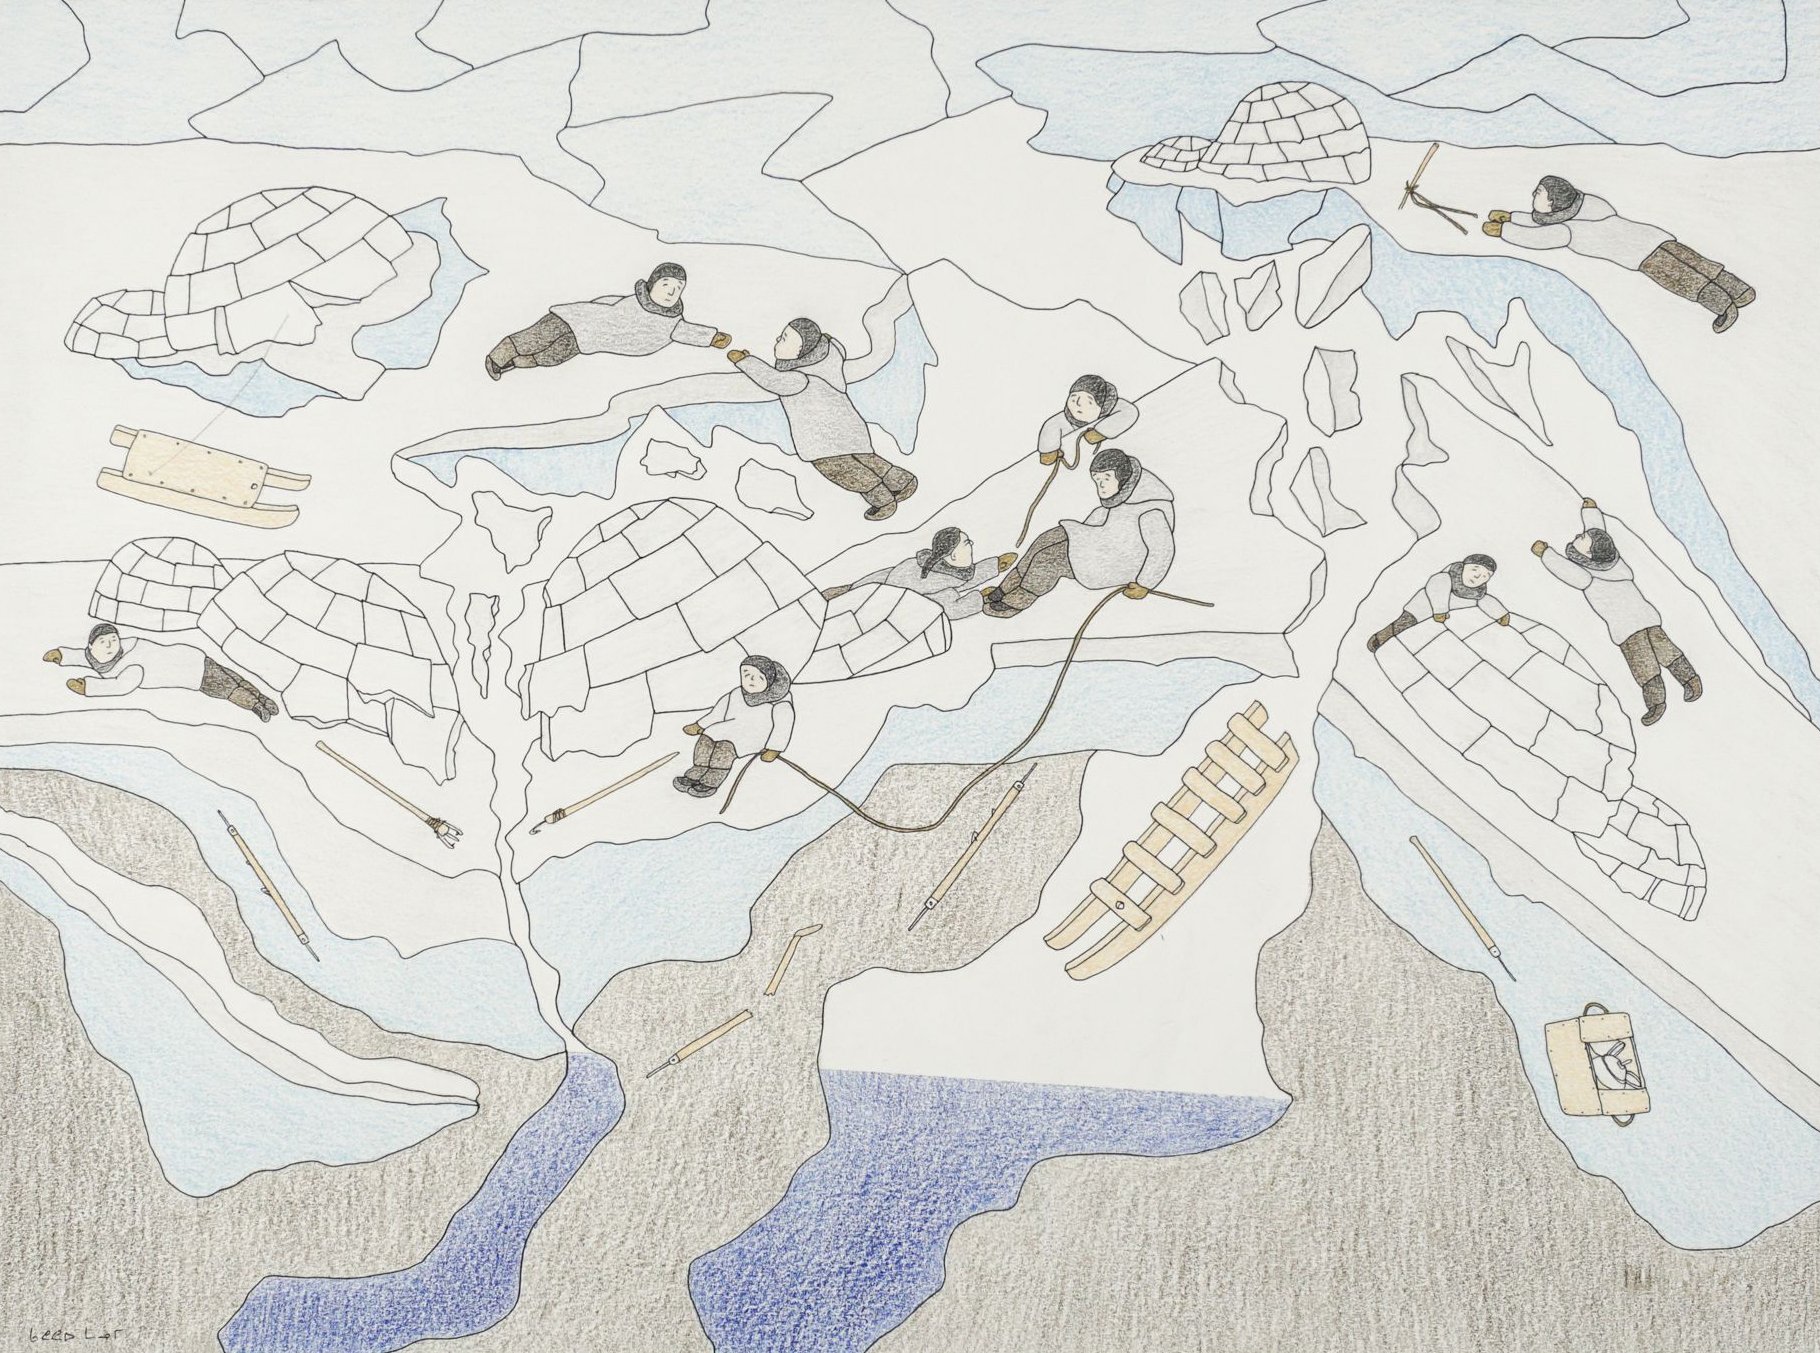 Featured image for “Thin Ice: Drawings by Qavavau Manumie”